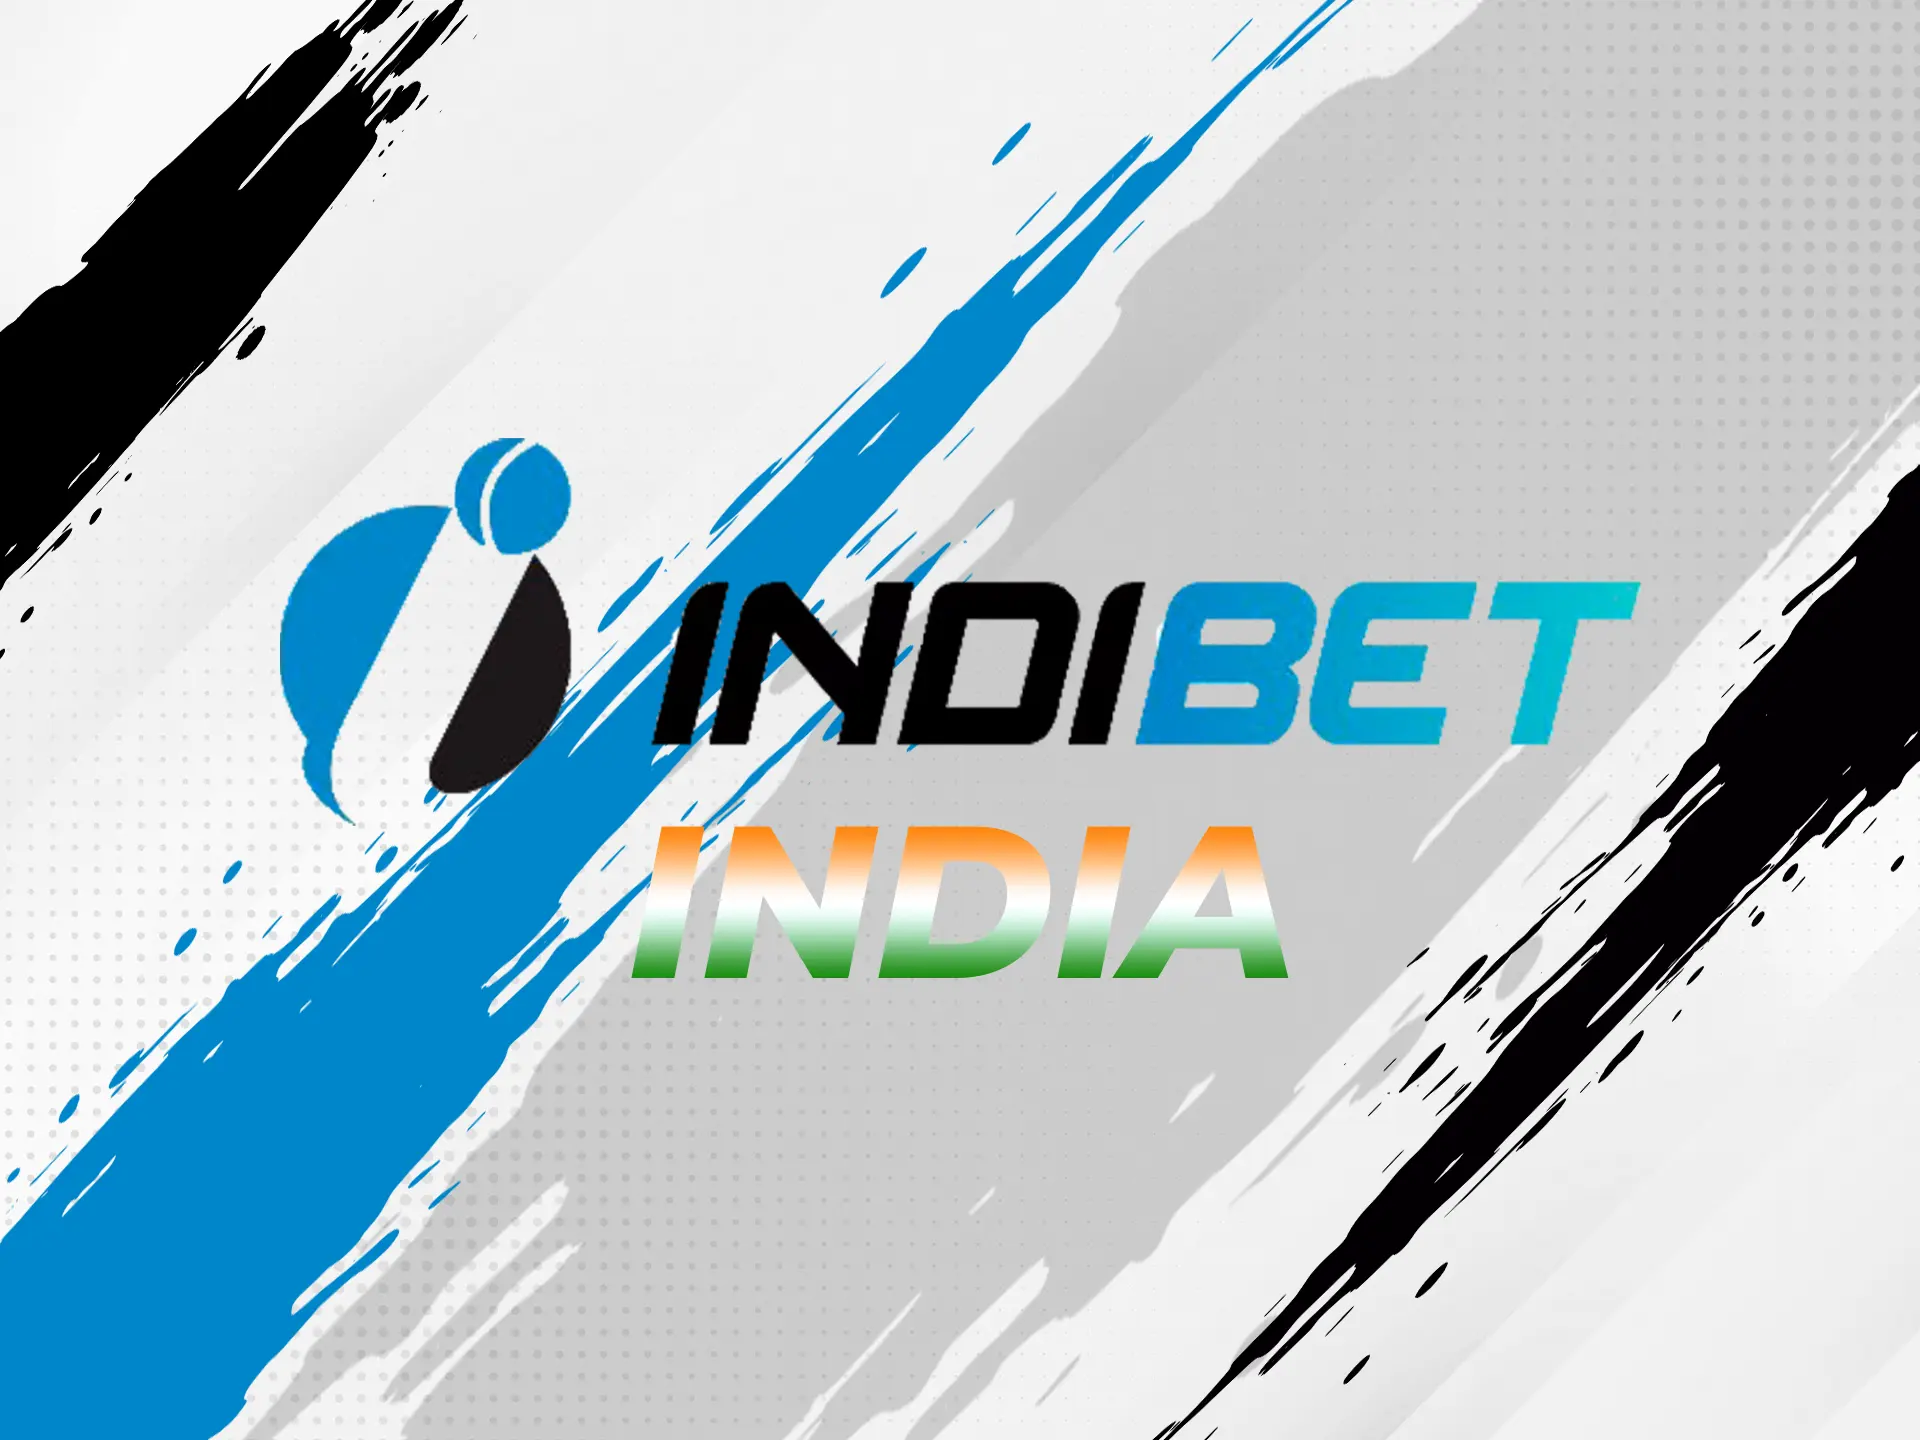 Explore more information about betting on the Indibet website.